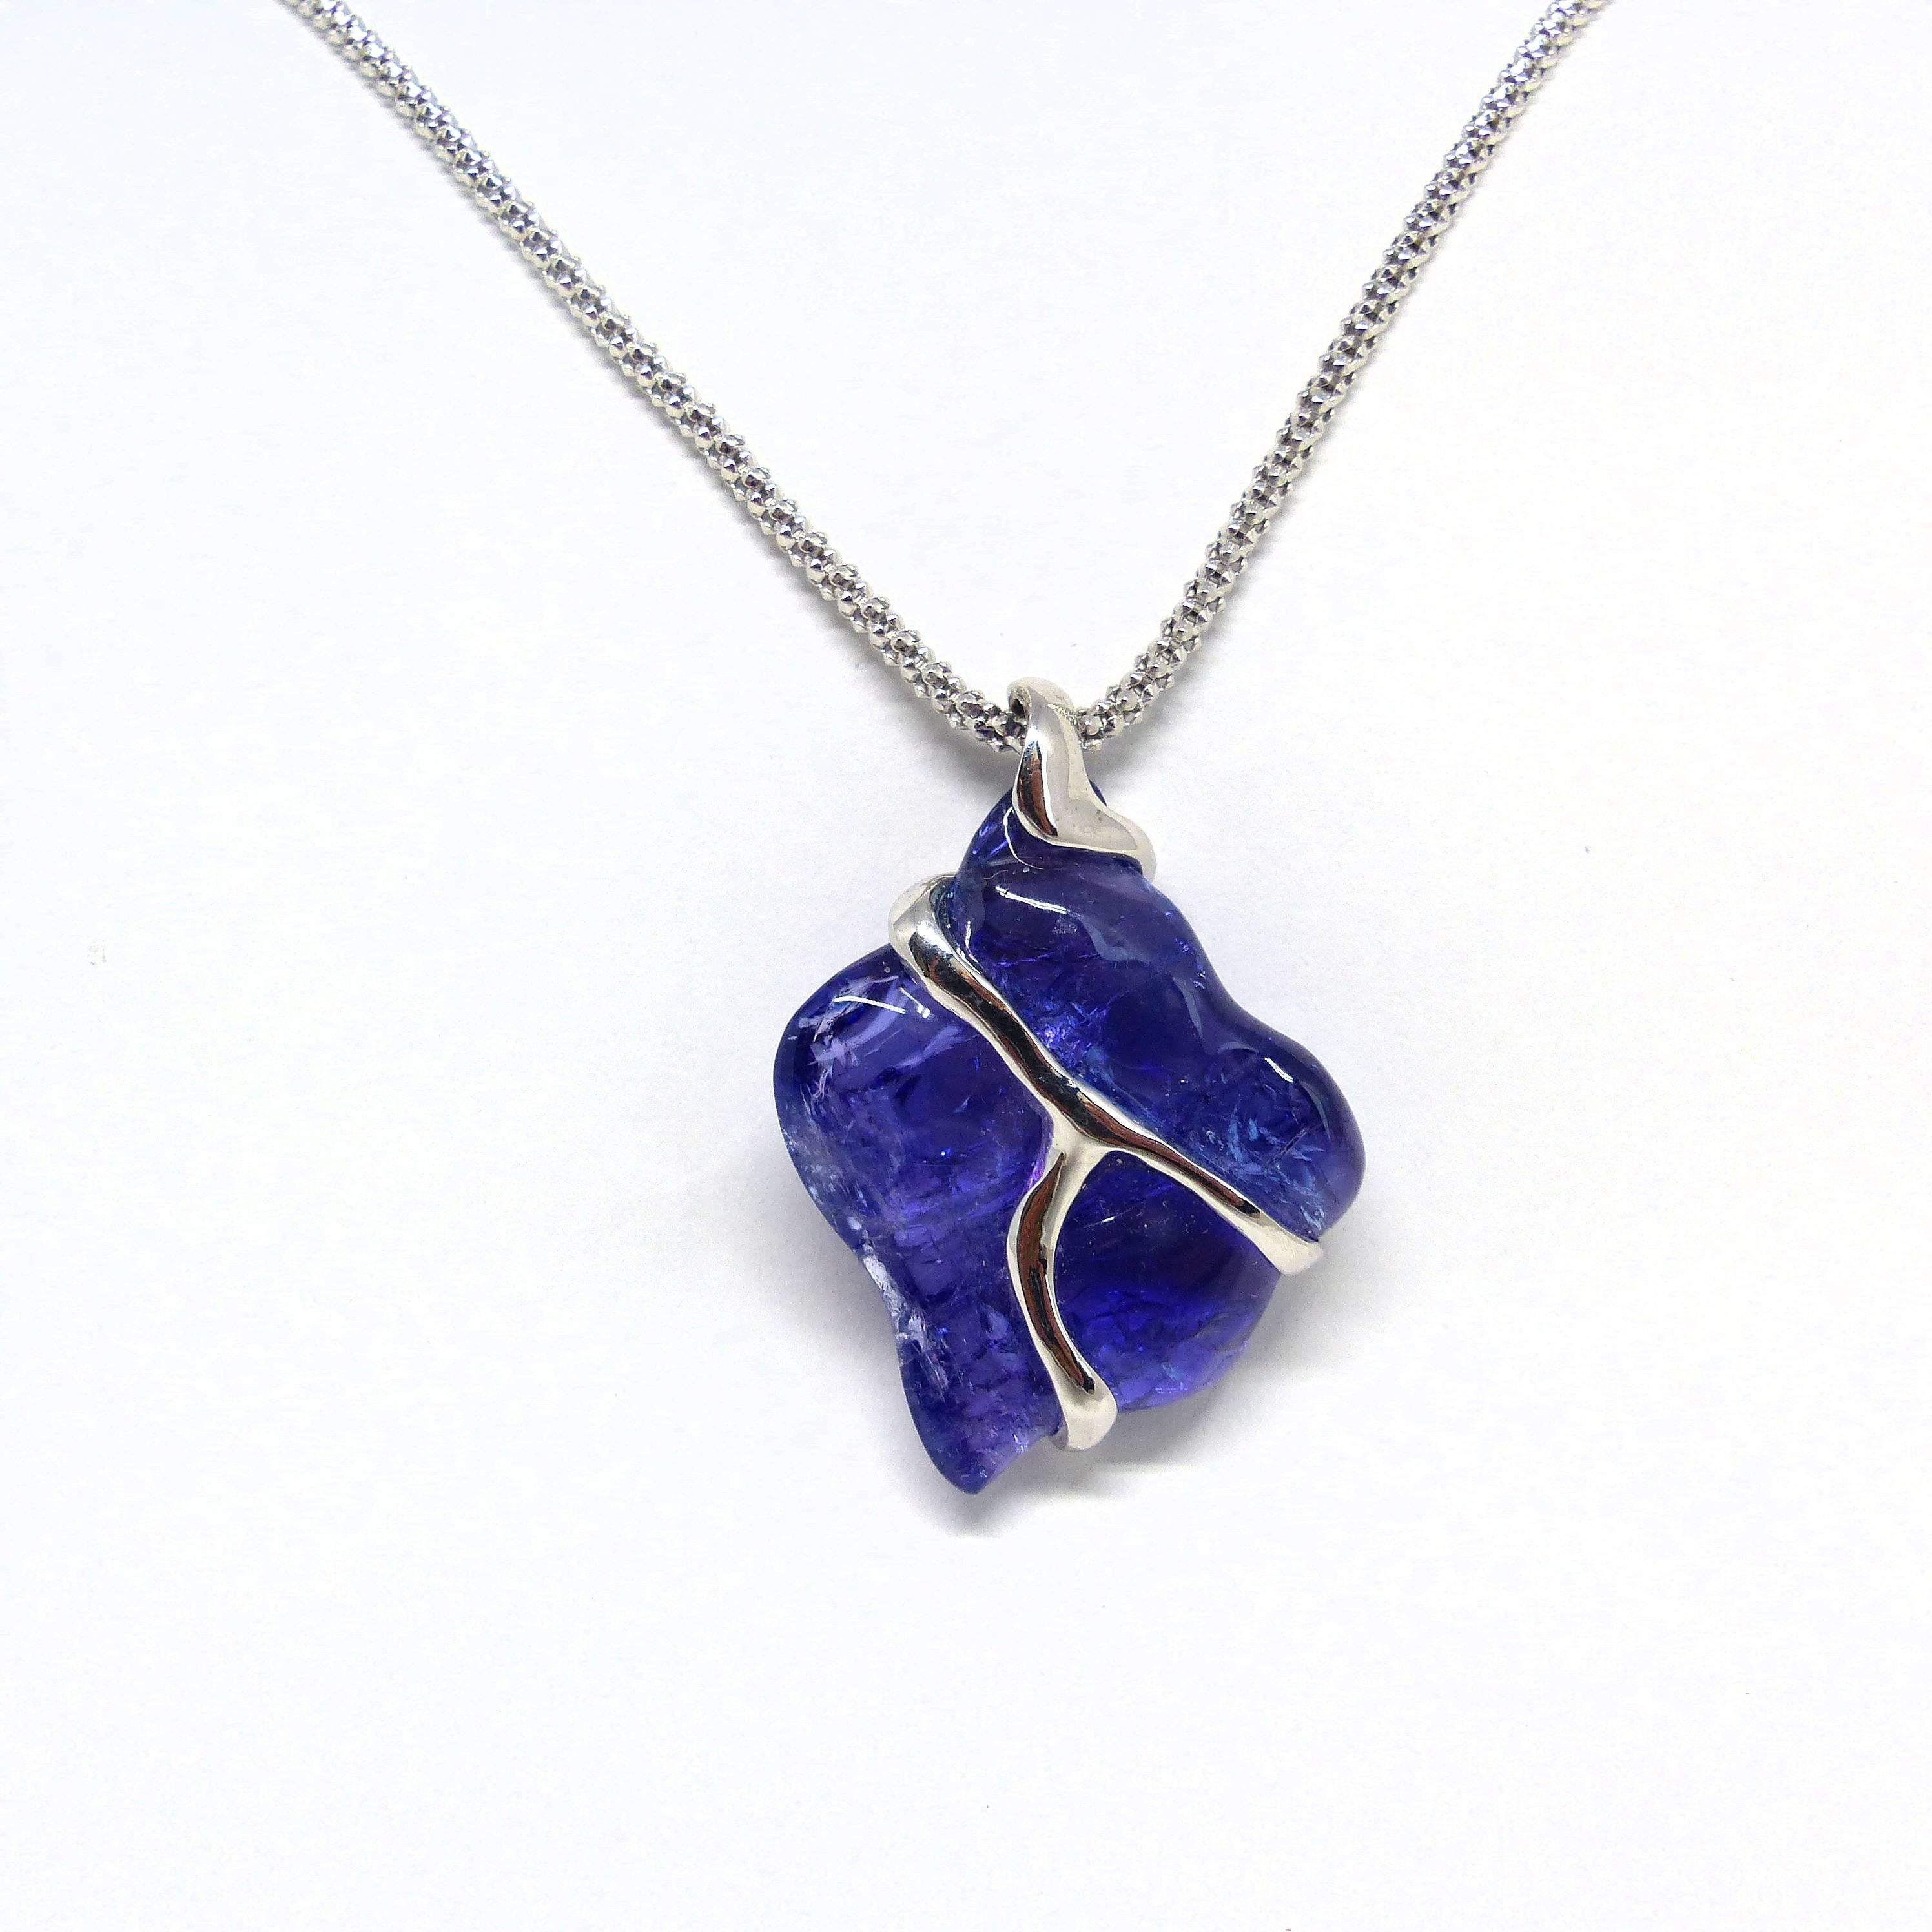 Thomas Leyser is renowned for his contemporary jewellery designs utilizing fine gemstones. 
		
This 18k white gold (6.5g) pendant is set with 1x fine Tanzanite (free-shape, 39.65ct) with hanger. 

The diameter inside is 5mm. 

